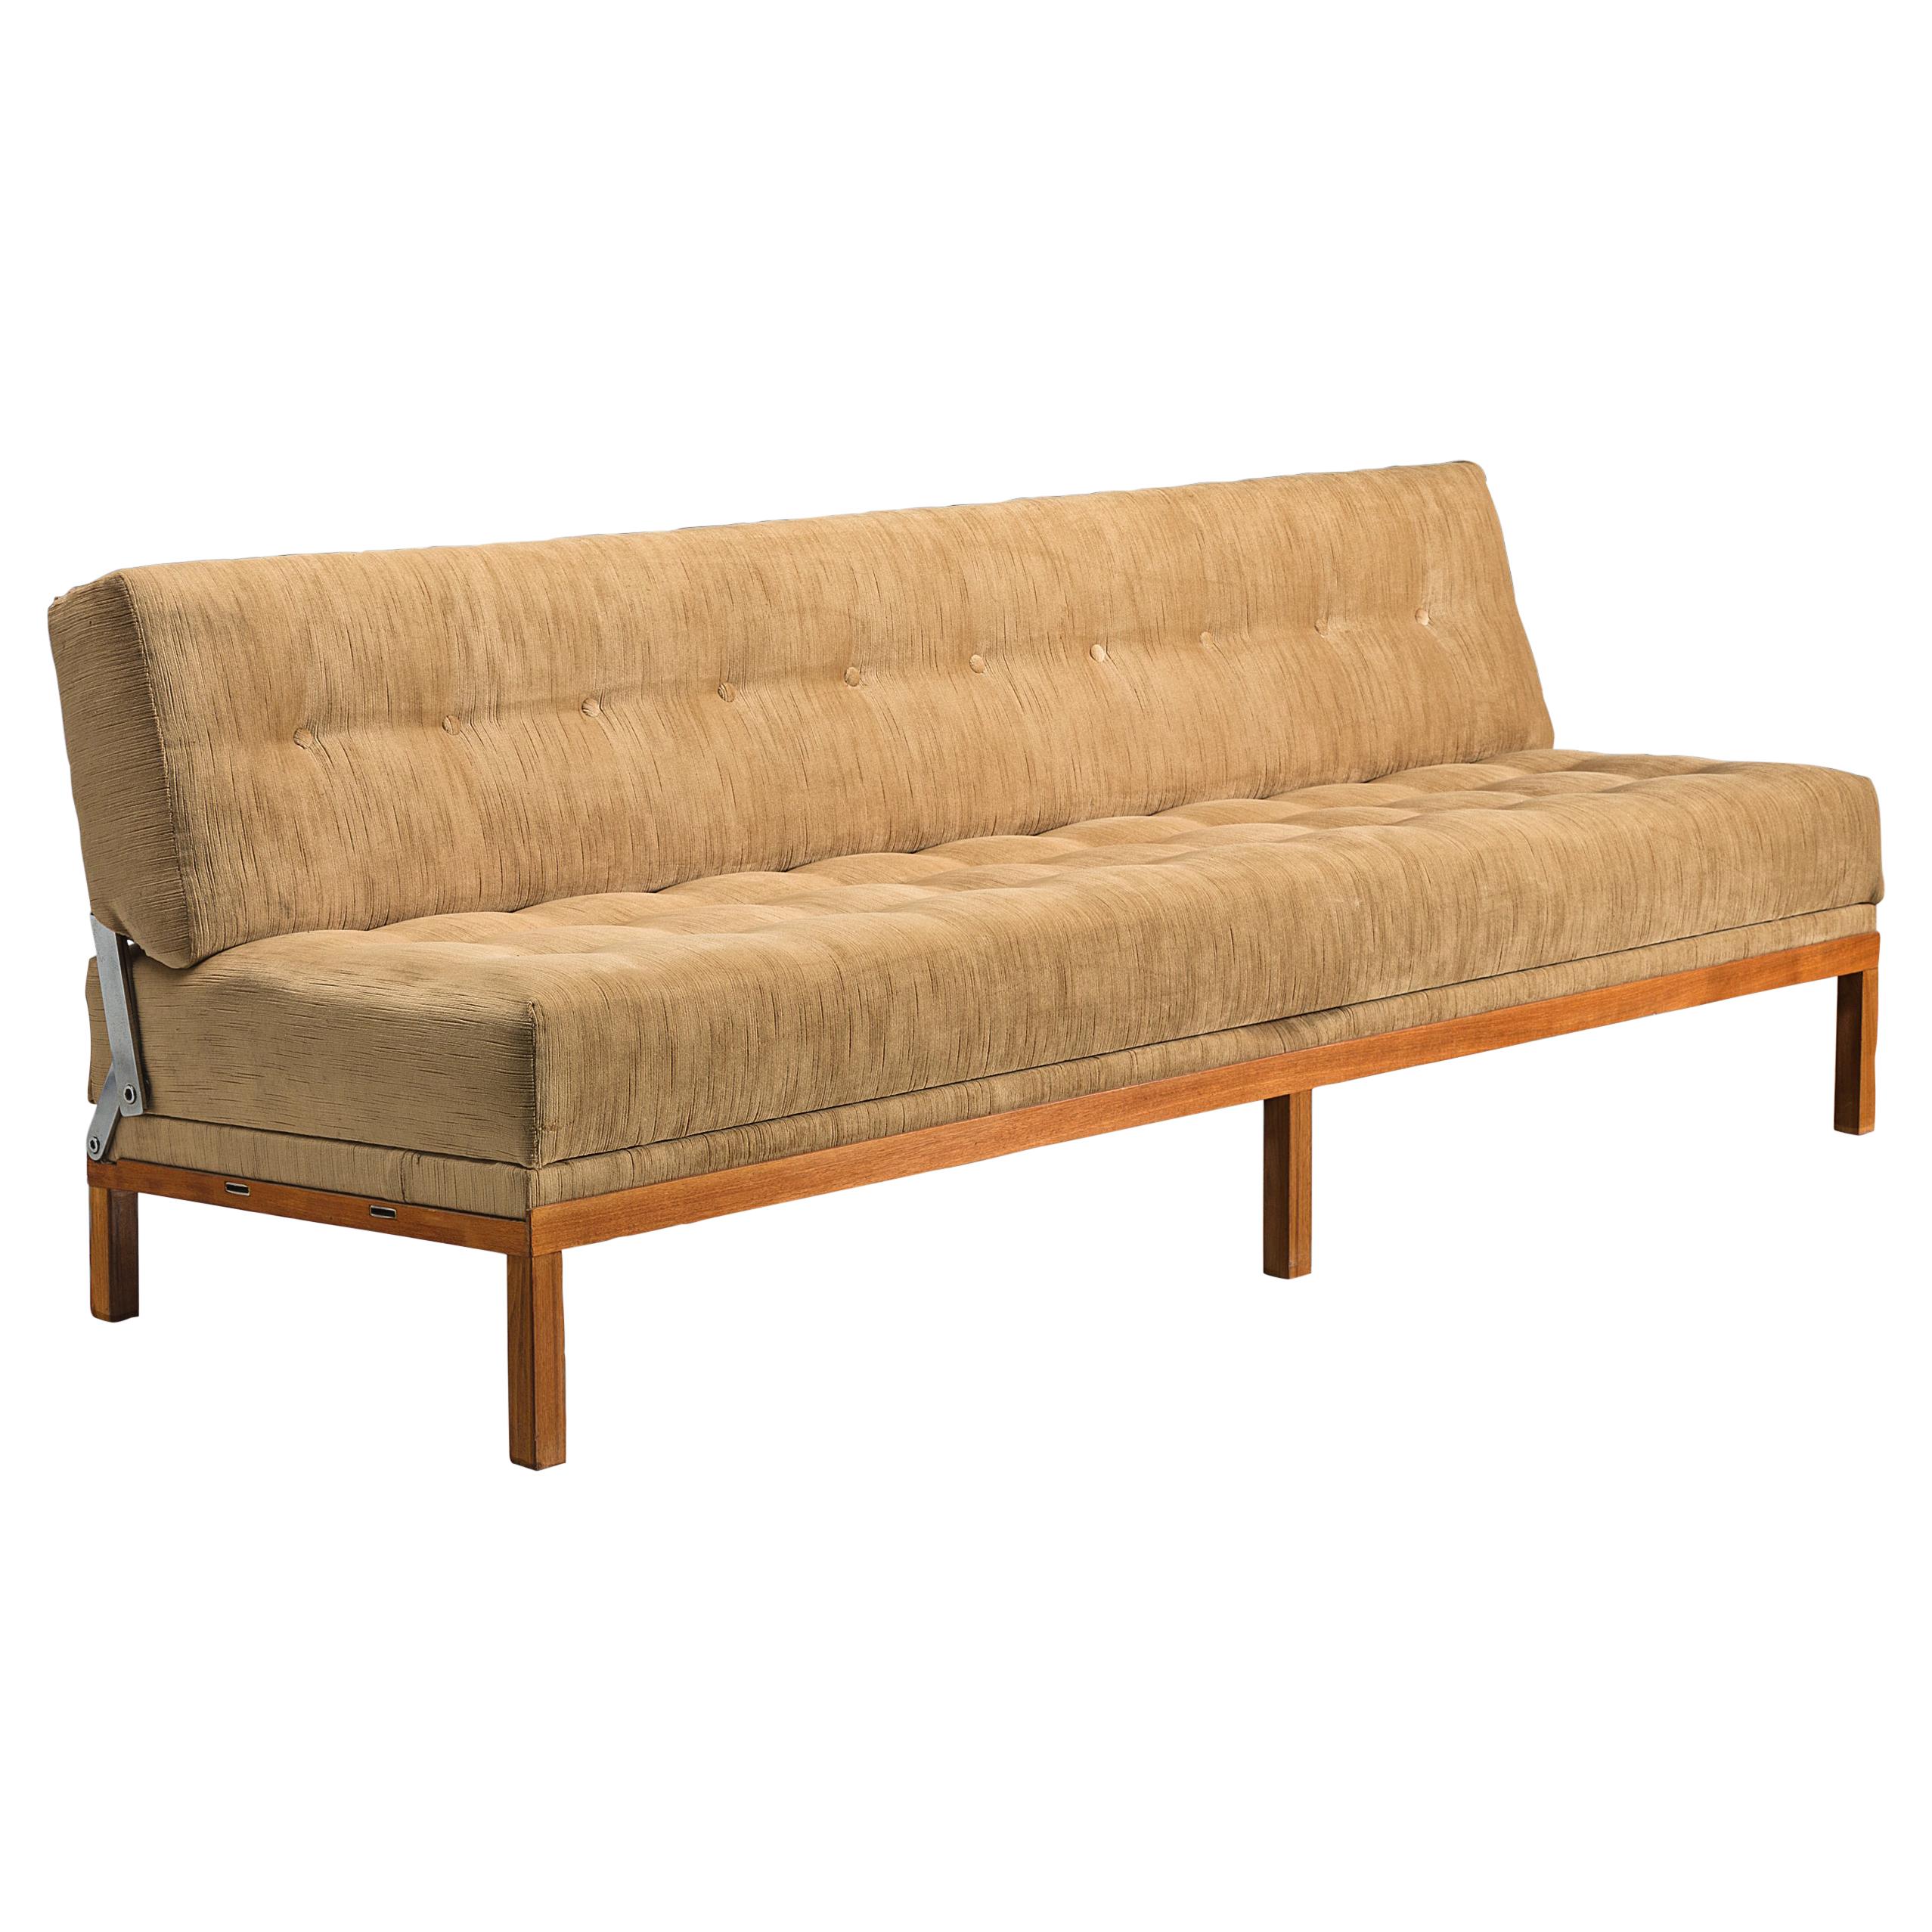 Johannes Spalt 'Constanze' Sofa or Daybed in Teak and Beige Upholstery 